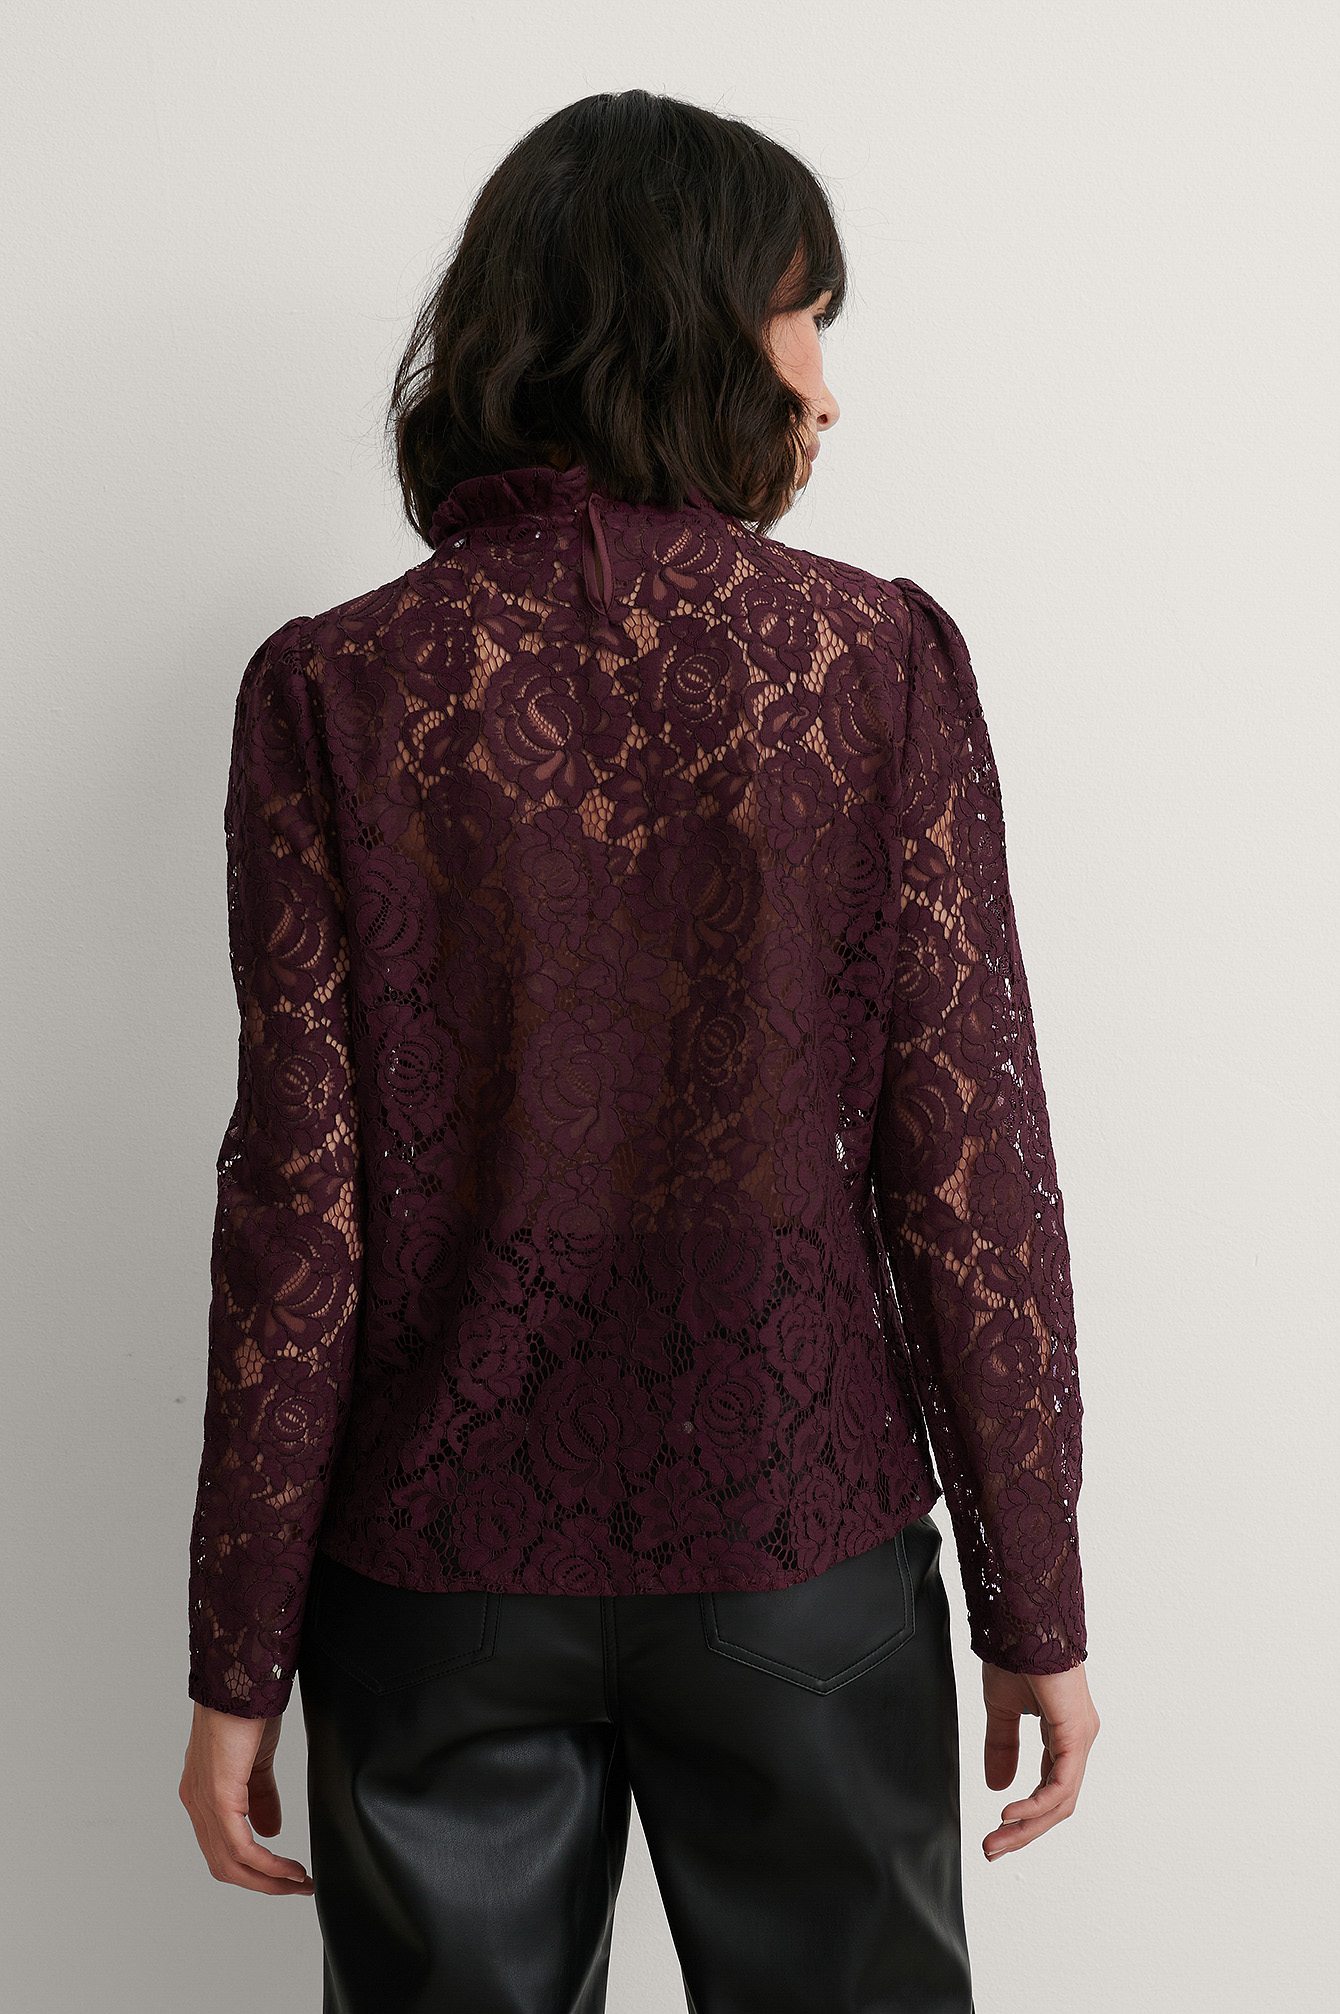 Burgundy High Neck Frill Lace Blouse